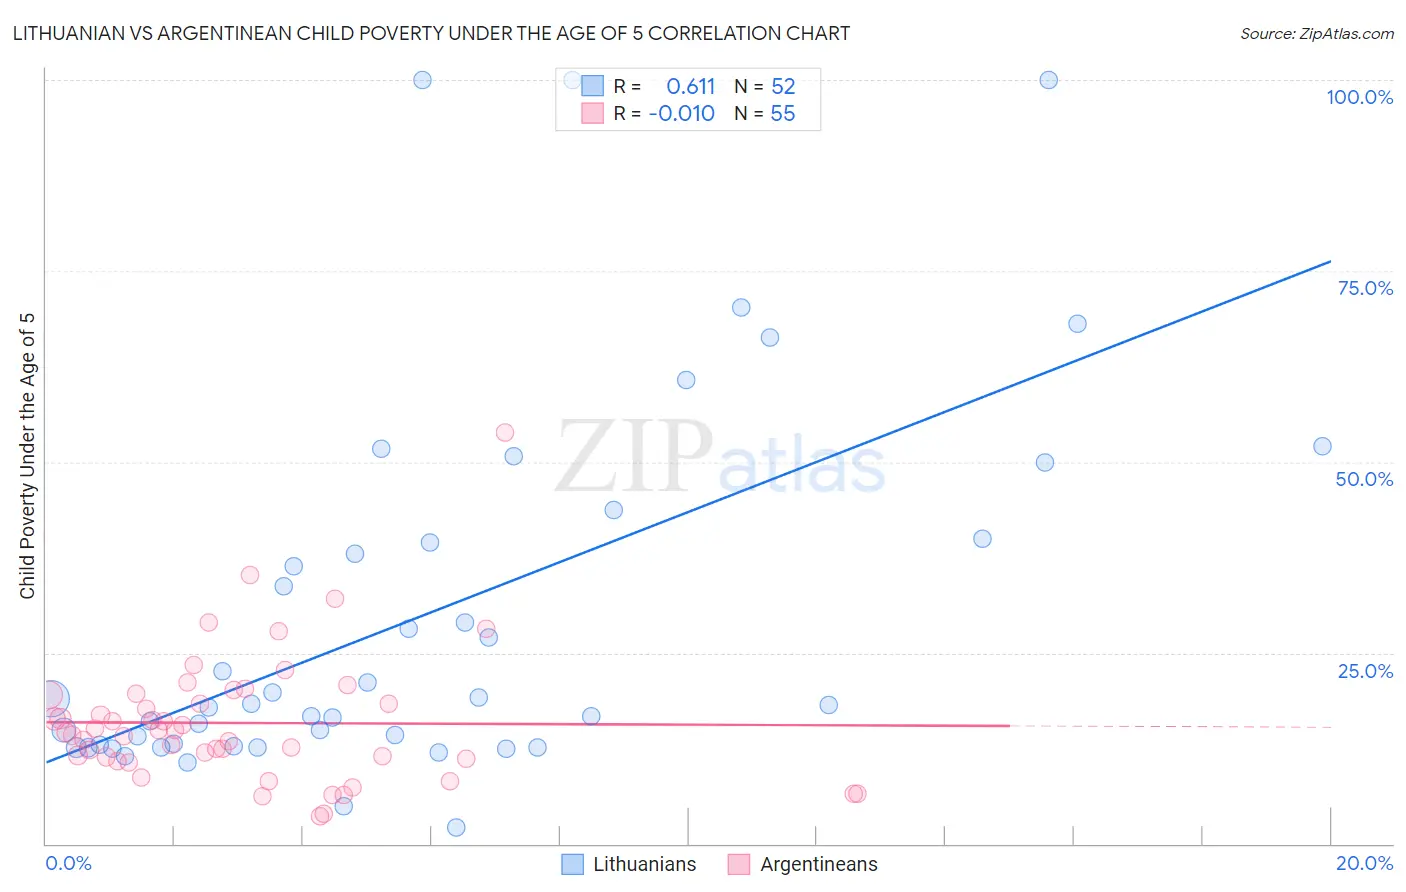 Lithuanian vs Argentinean Child Poverty Under the Age of 5